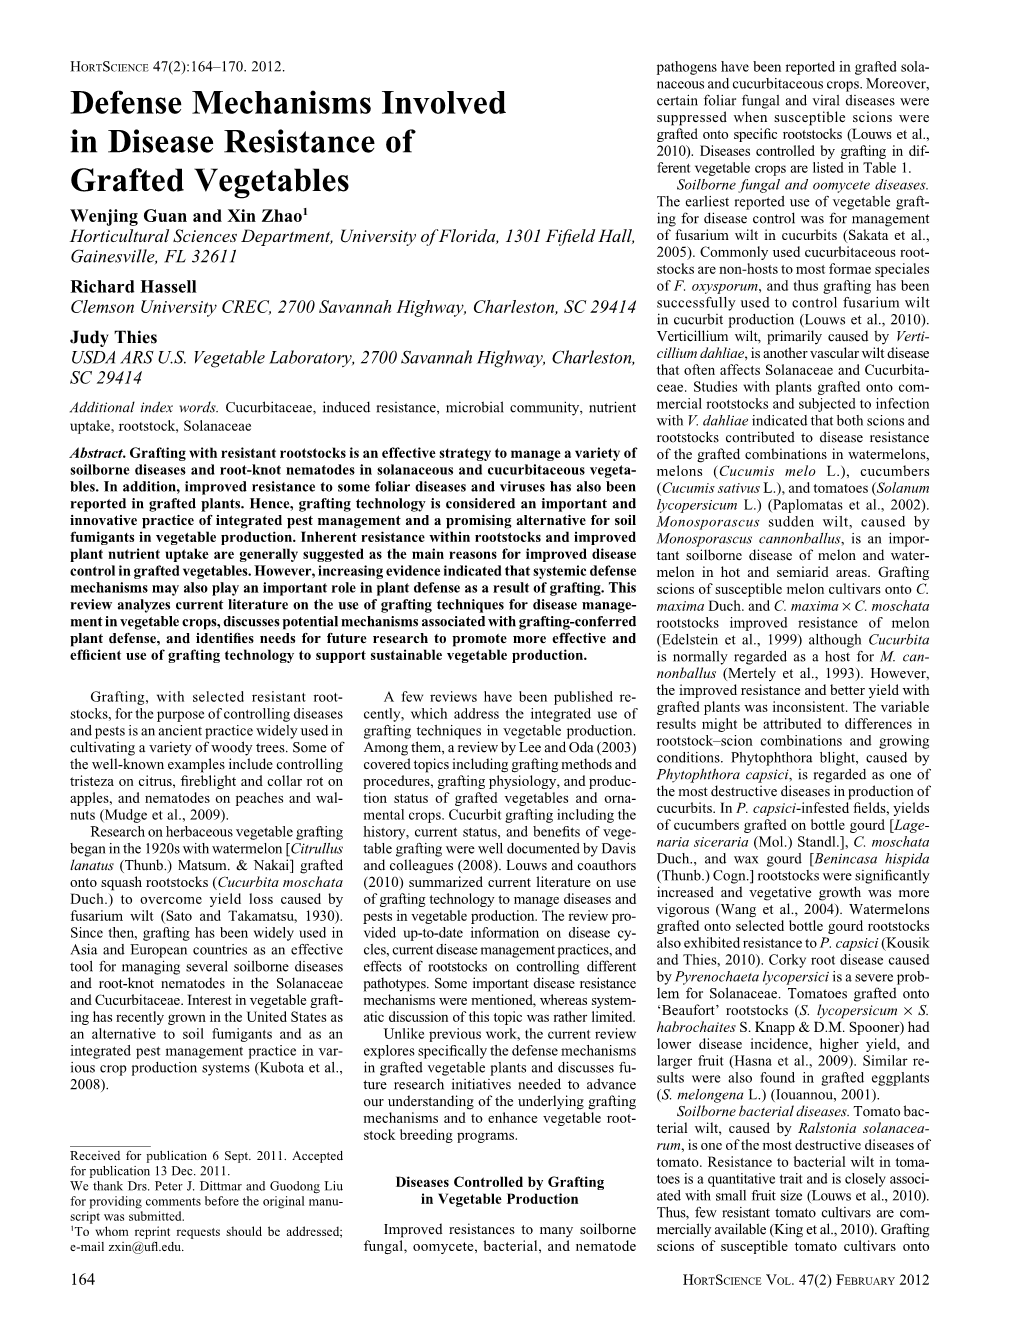 Defense Mechanisms Involved in Disease Resistance of Grafted